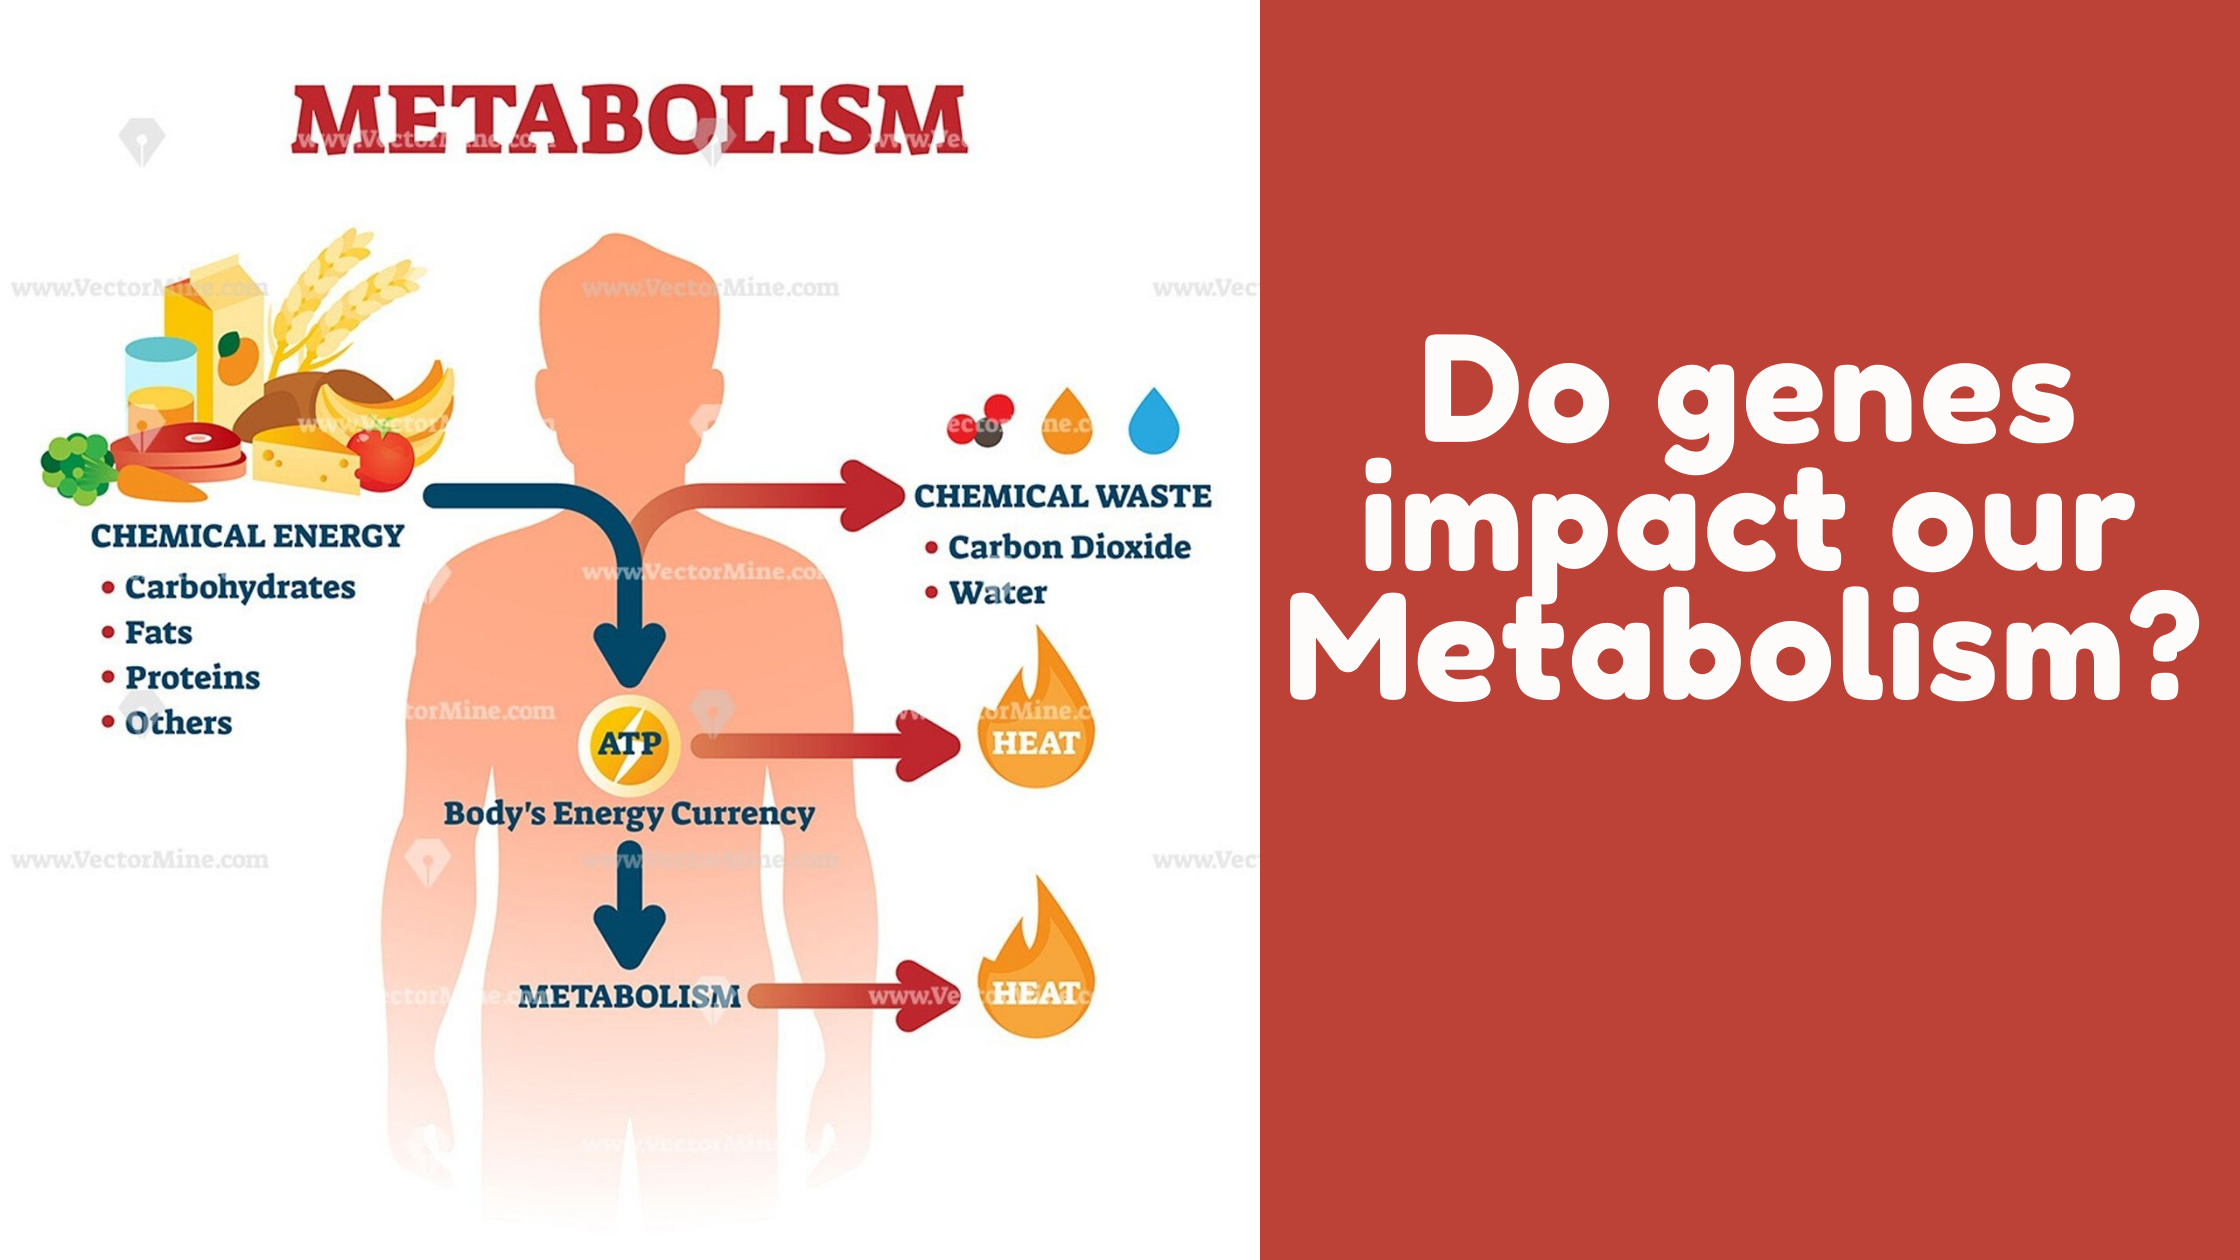 Do genes impact our Metabolism?